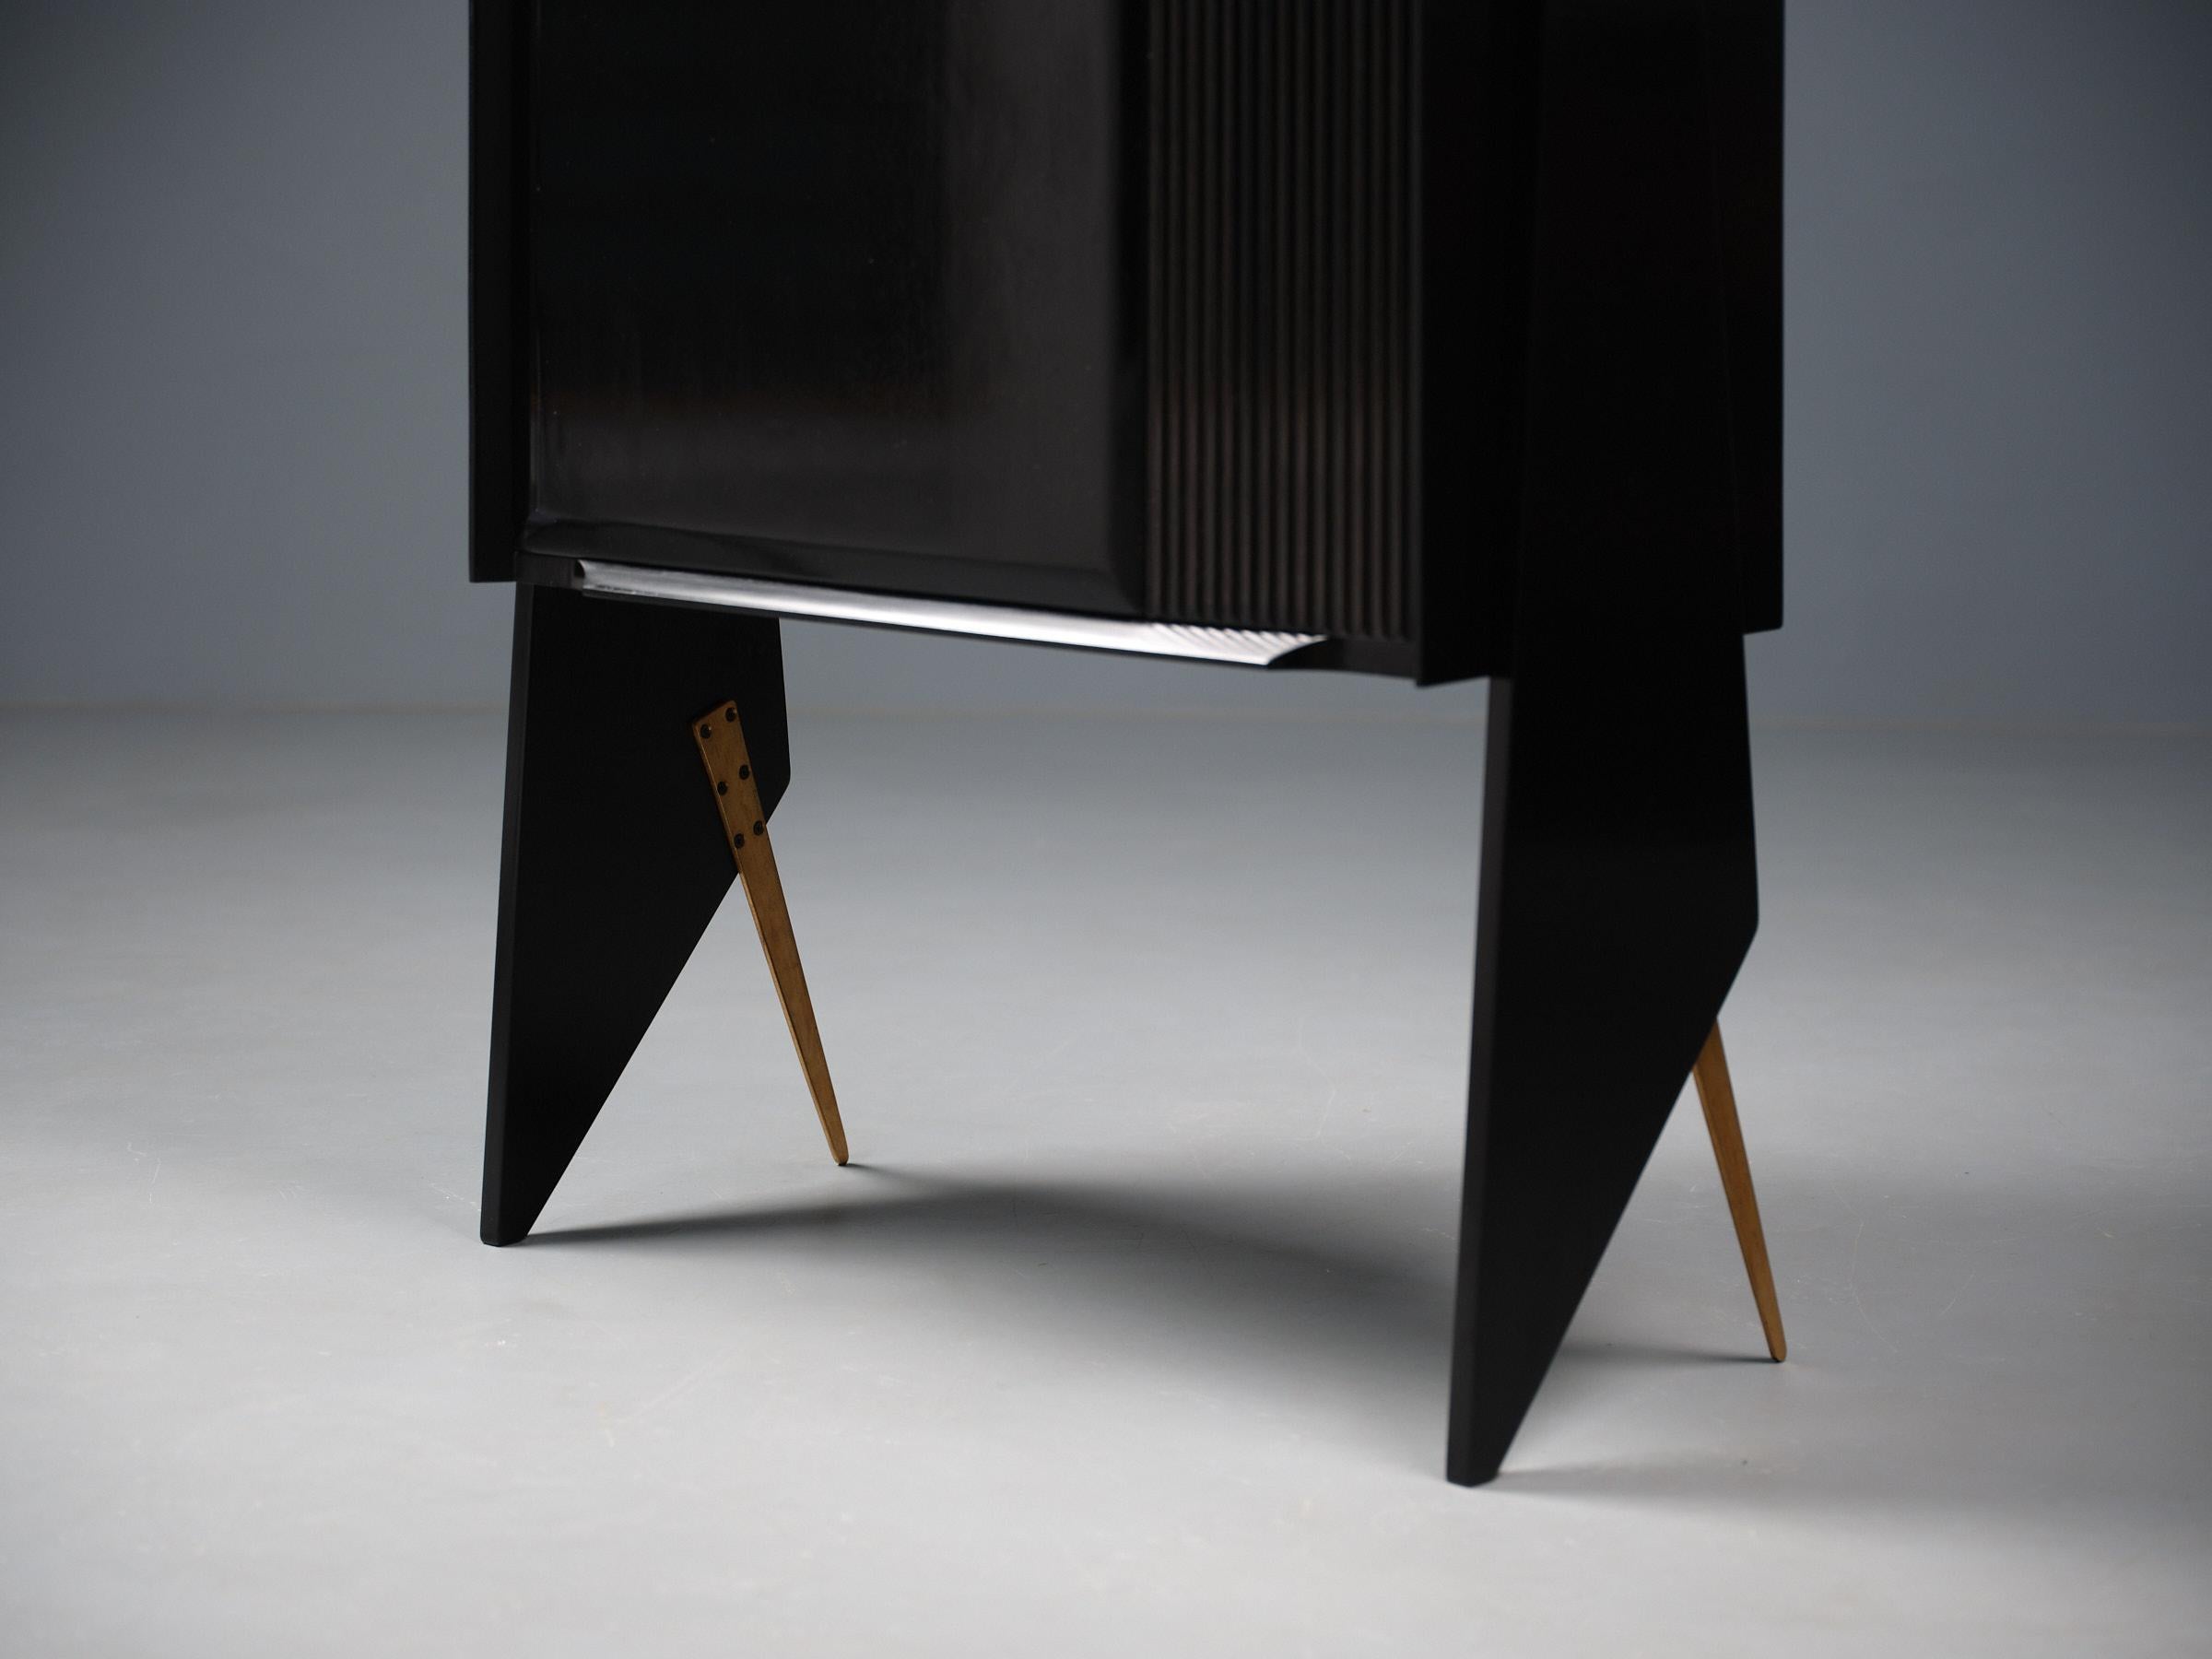 Mid-20th Century RETRO4M Restyled 1950s Italian Highboard– A Modernist Noir For Sale